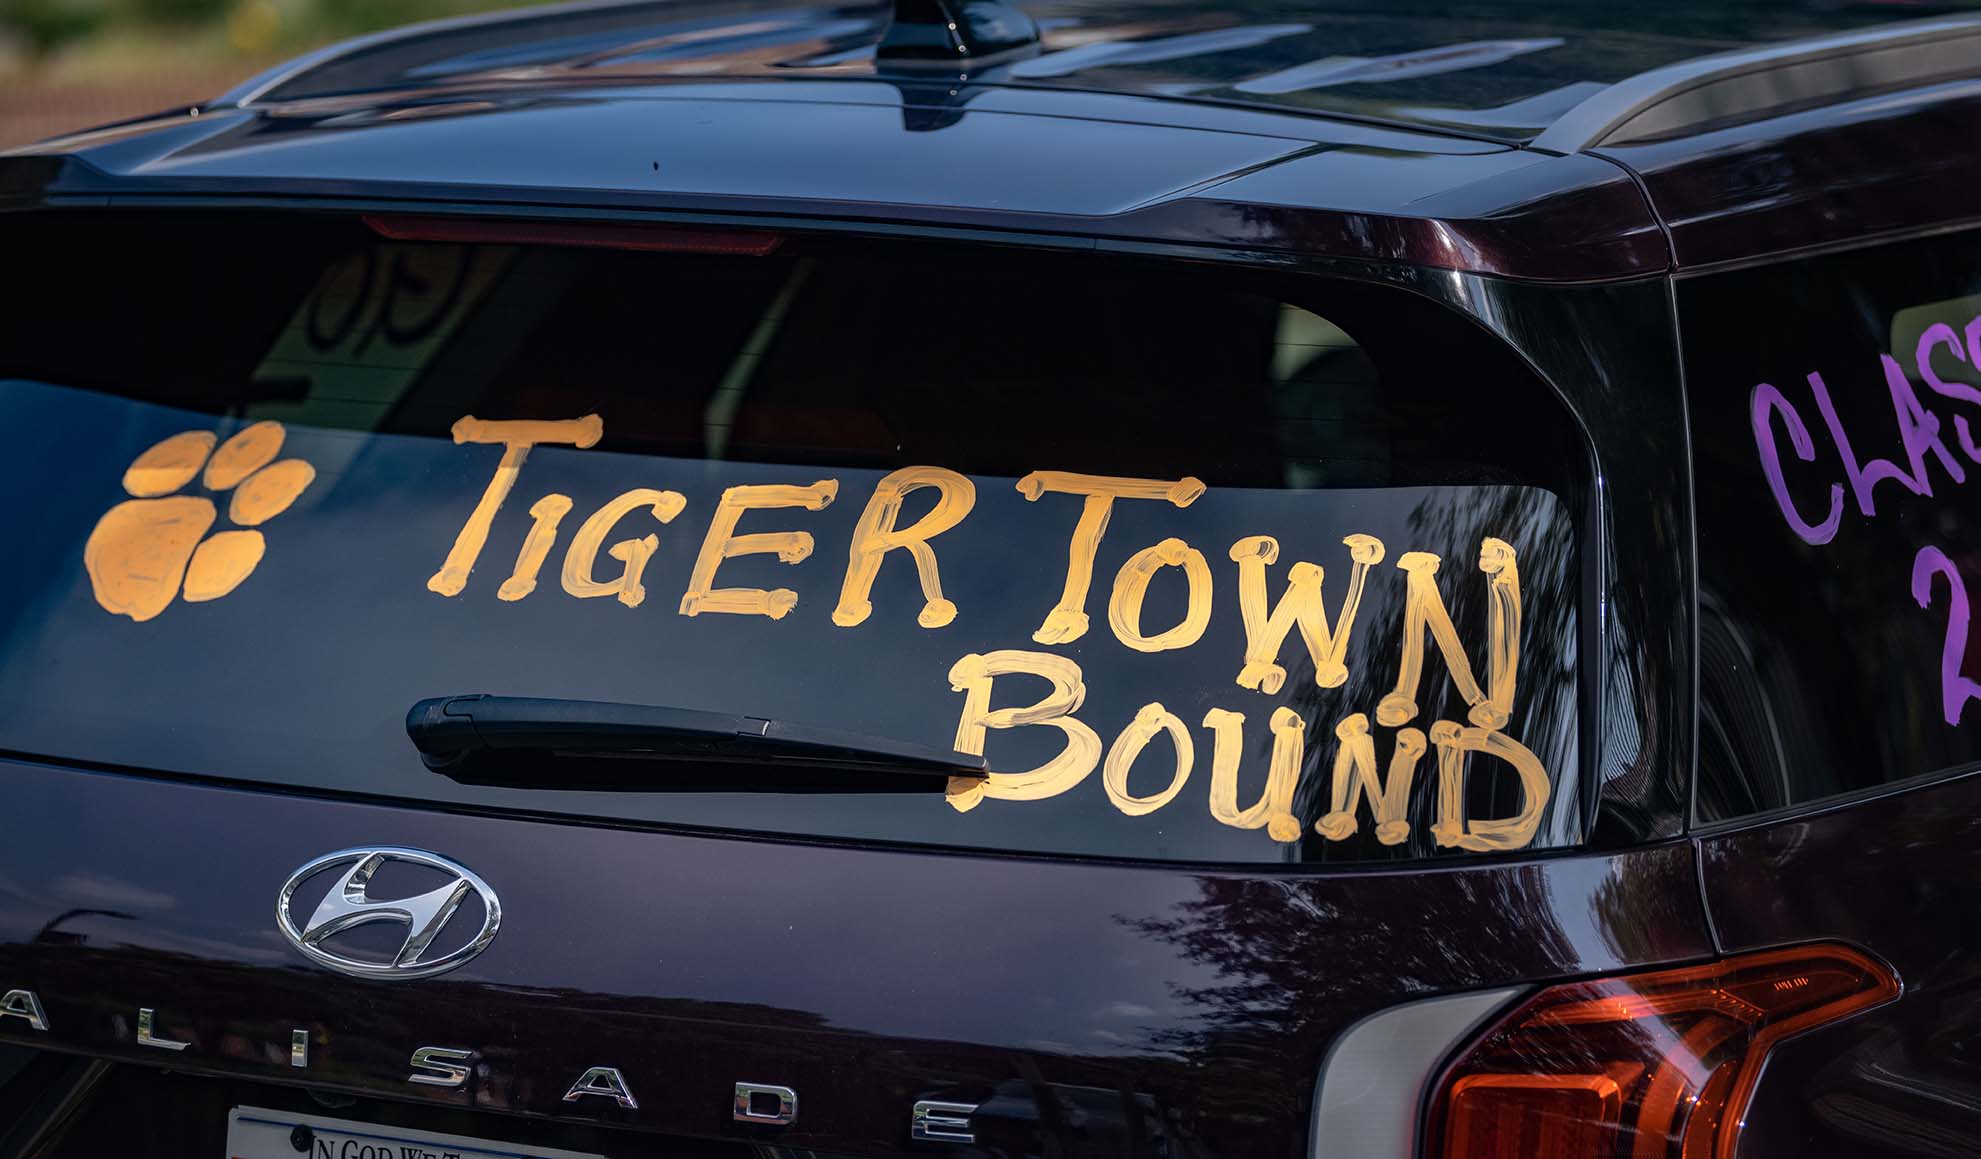 A car's back window with TigerTown Bound painted on it.